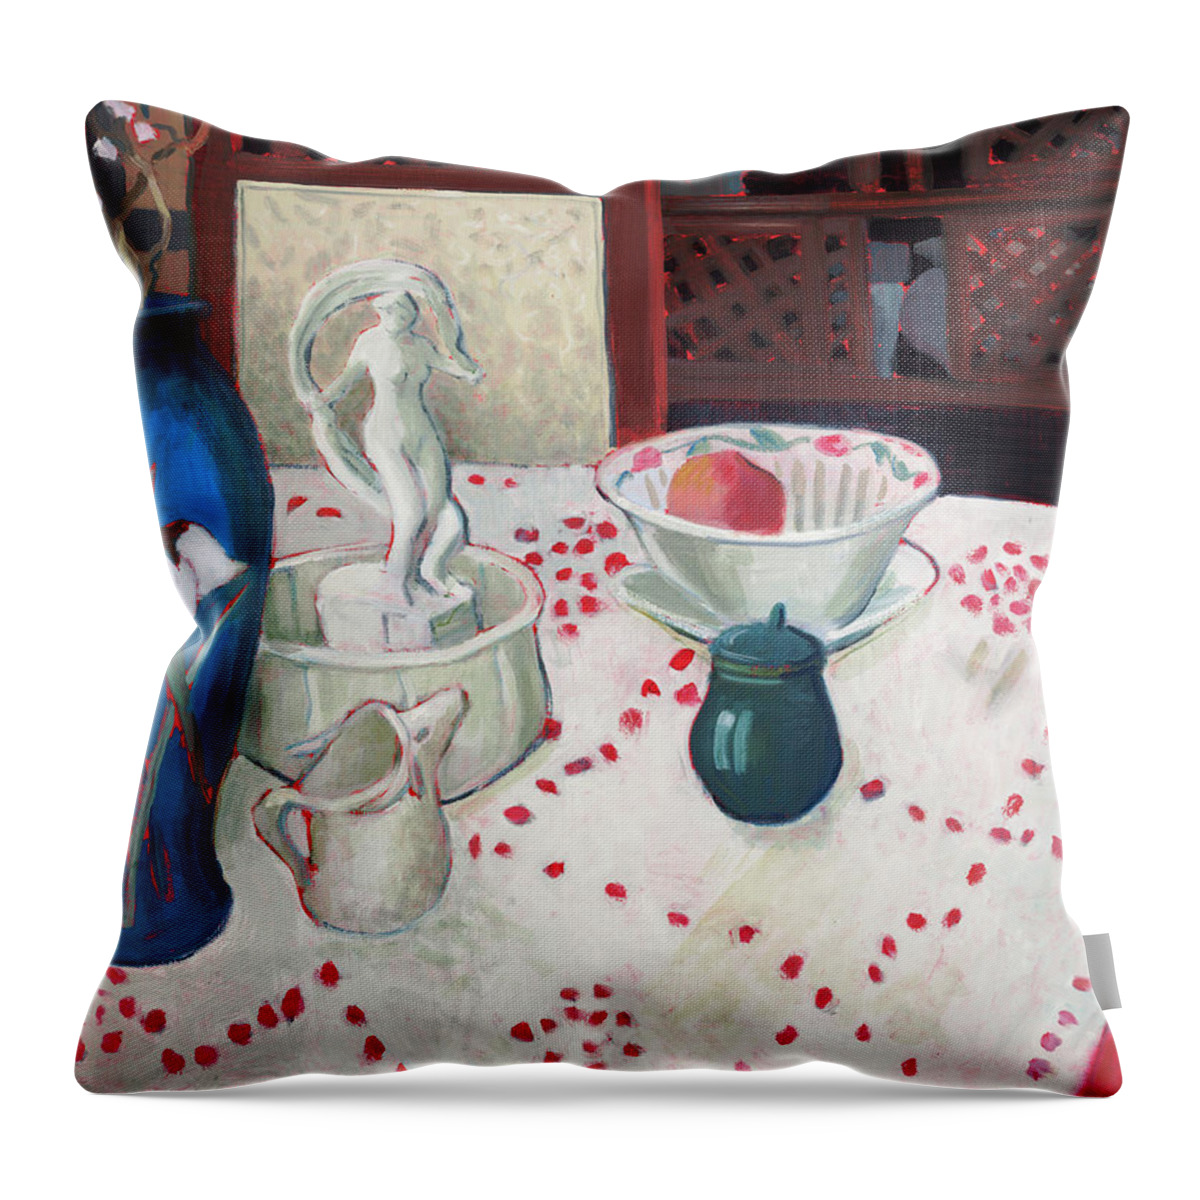 Still Life Throw Pillow featuring the painting Dancing Figurine by Thomas Tribby